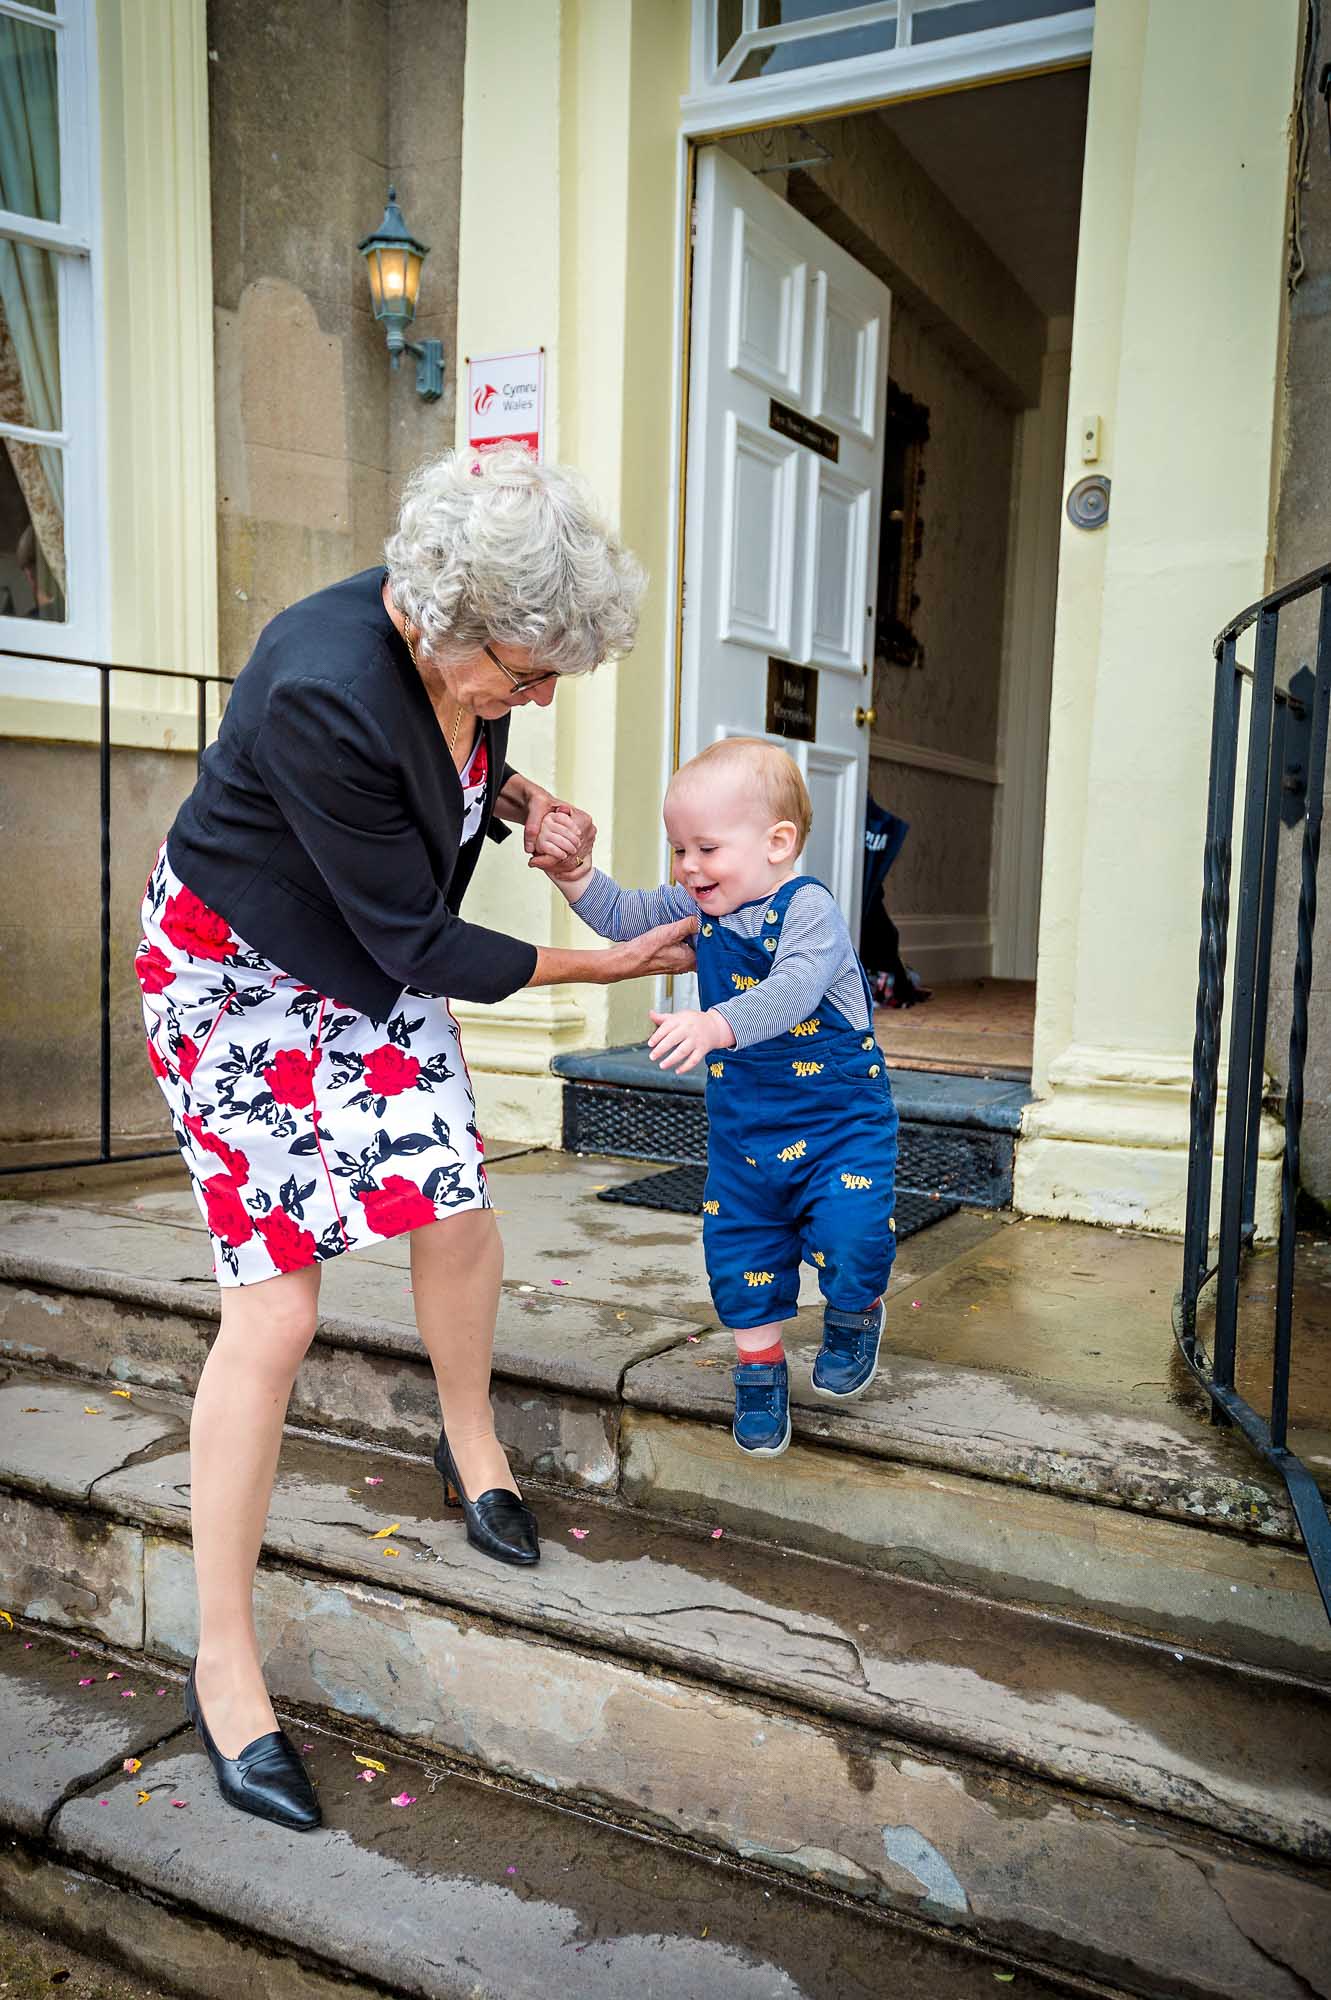 Grinning toddler helped down hotel steps at Cardiff wedding